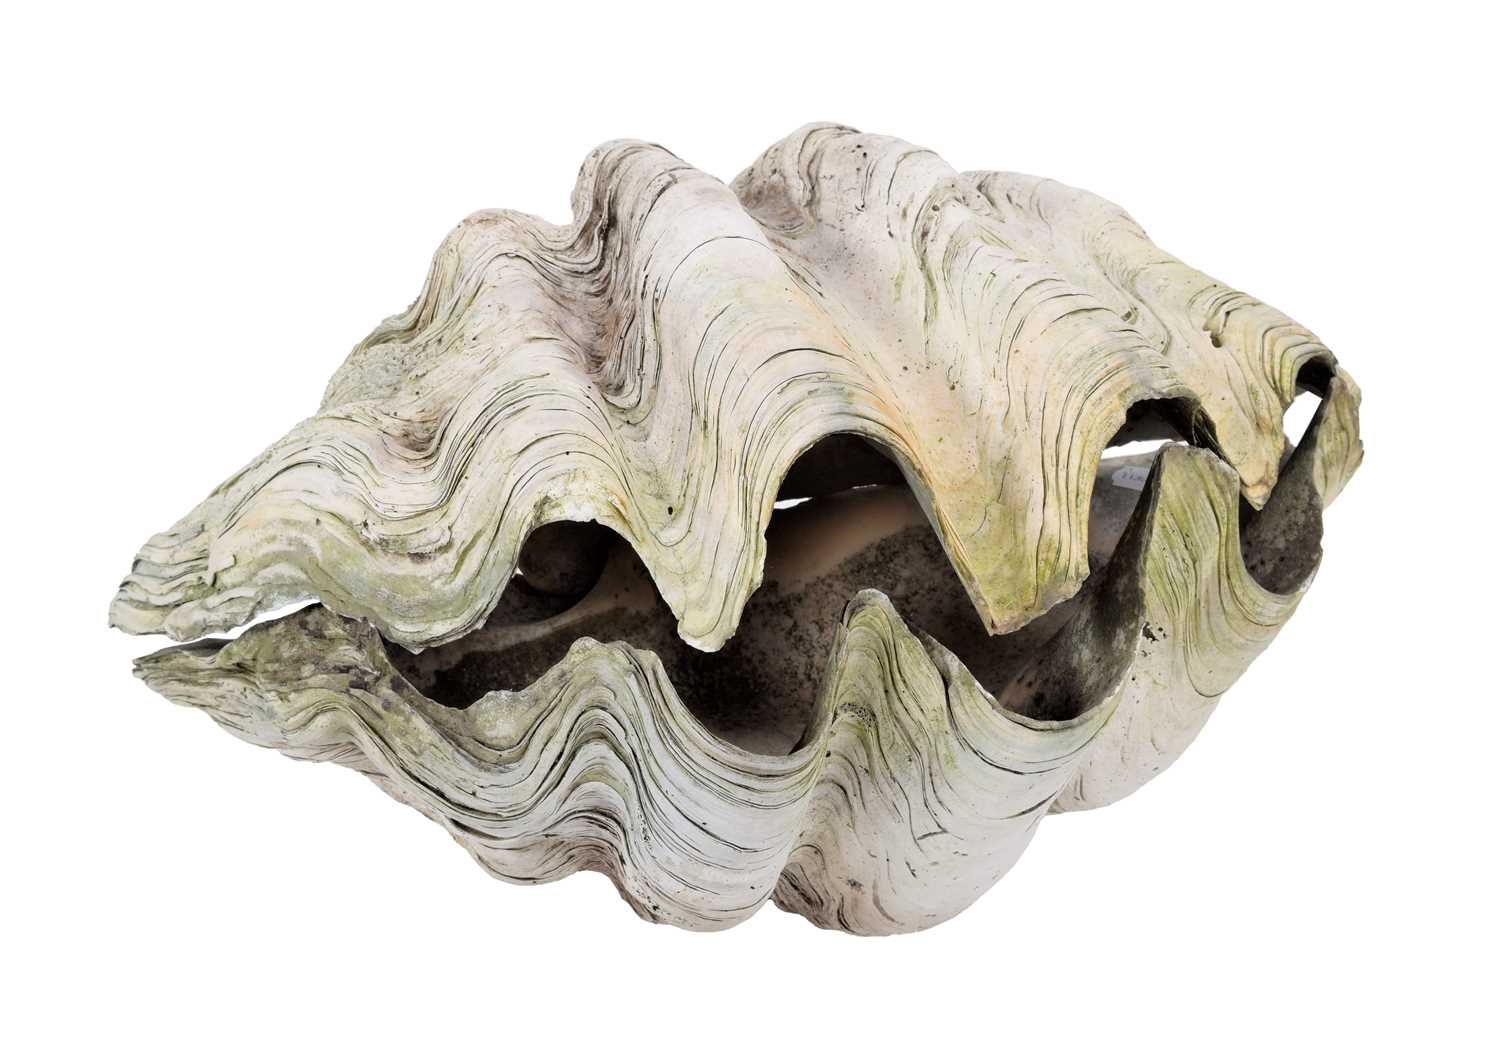 Lot 143 - Conchology: Giant Clam Shell (Tridacna